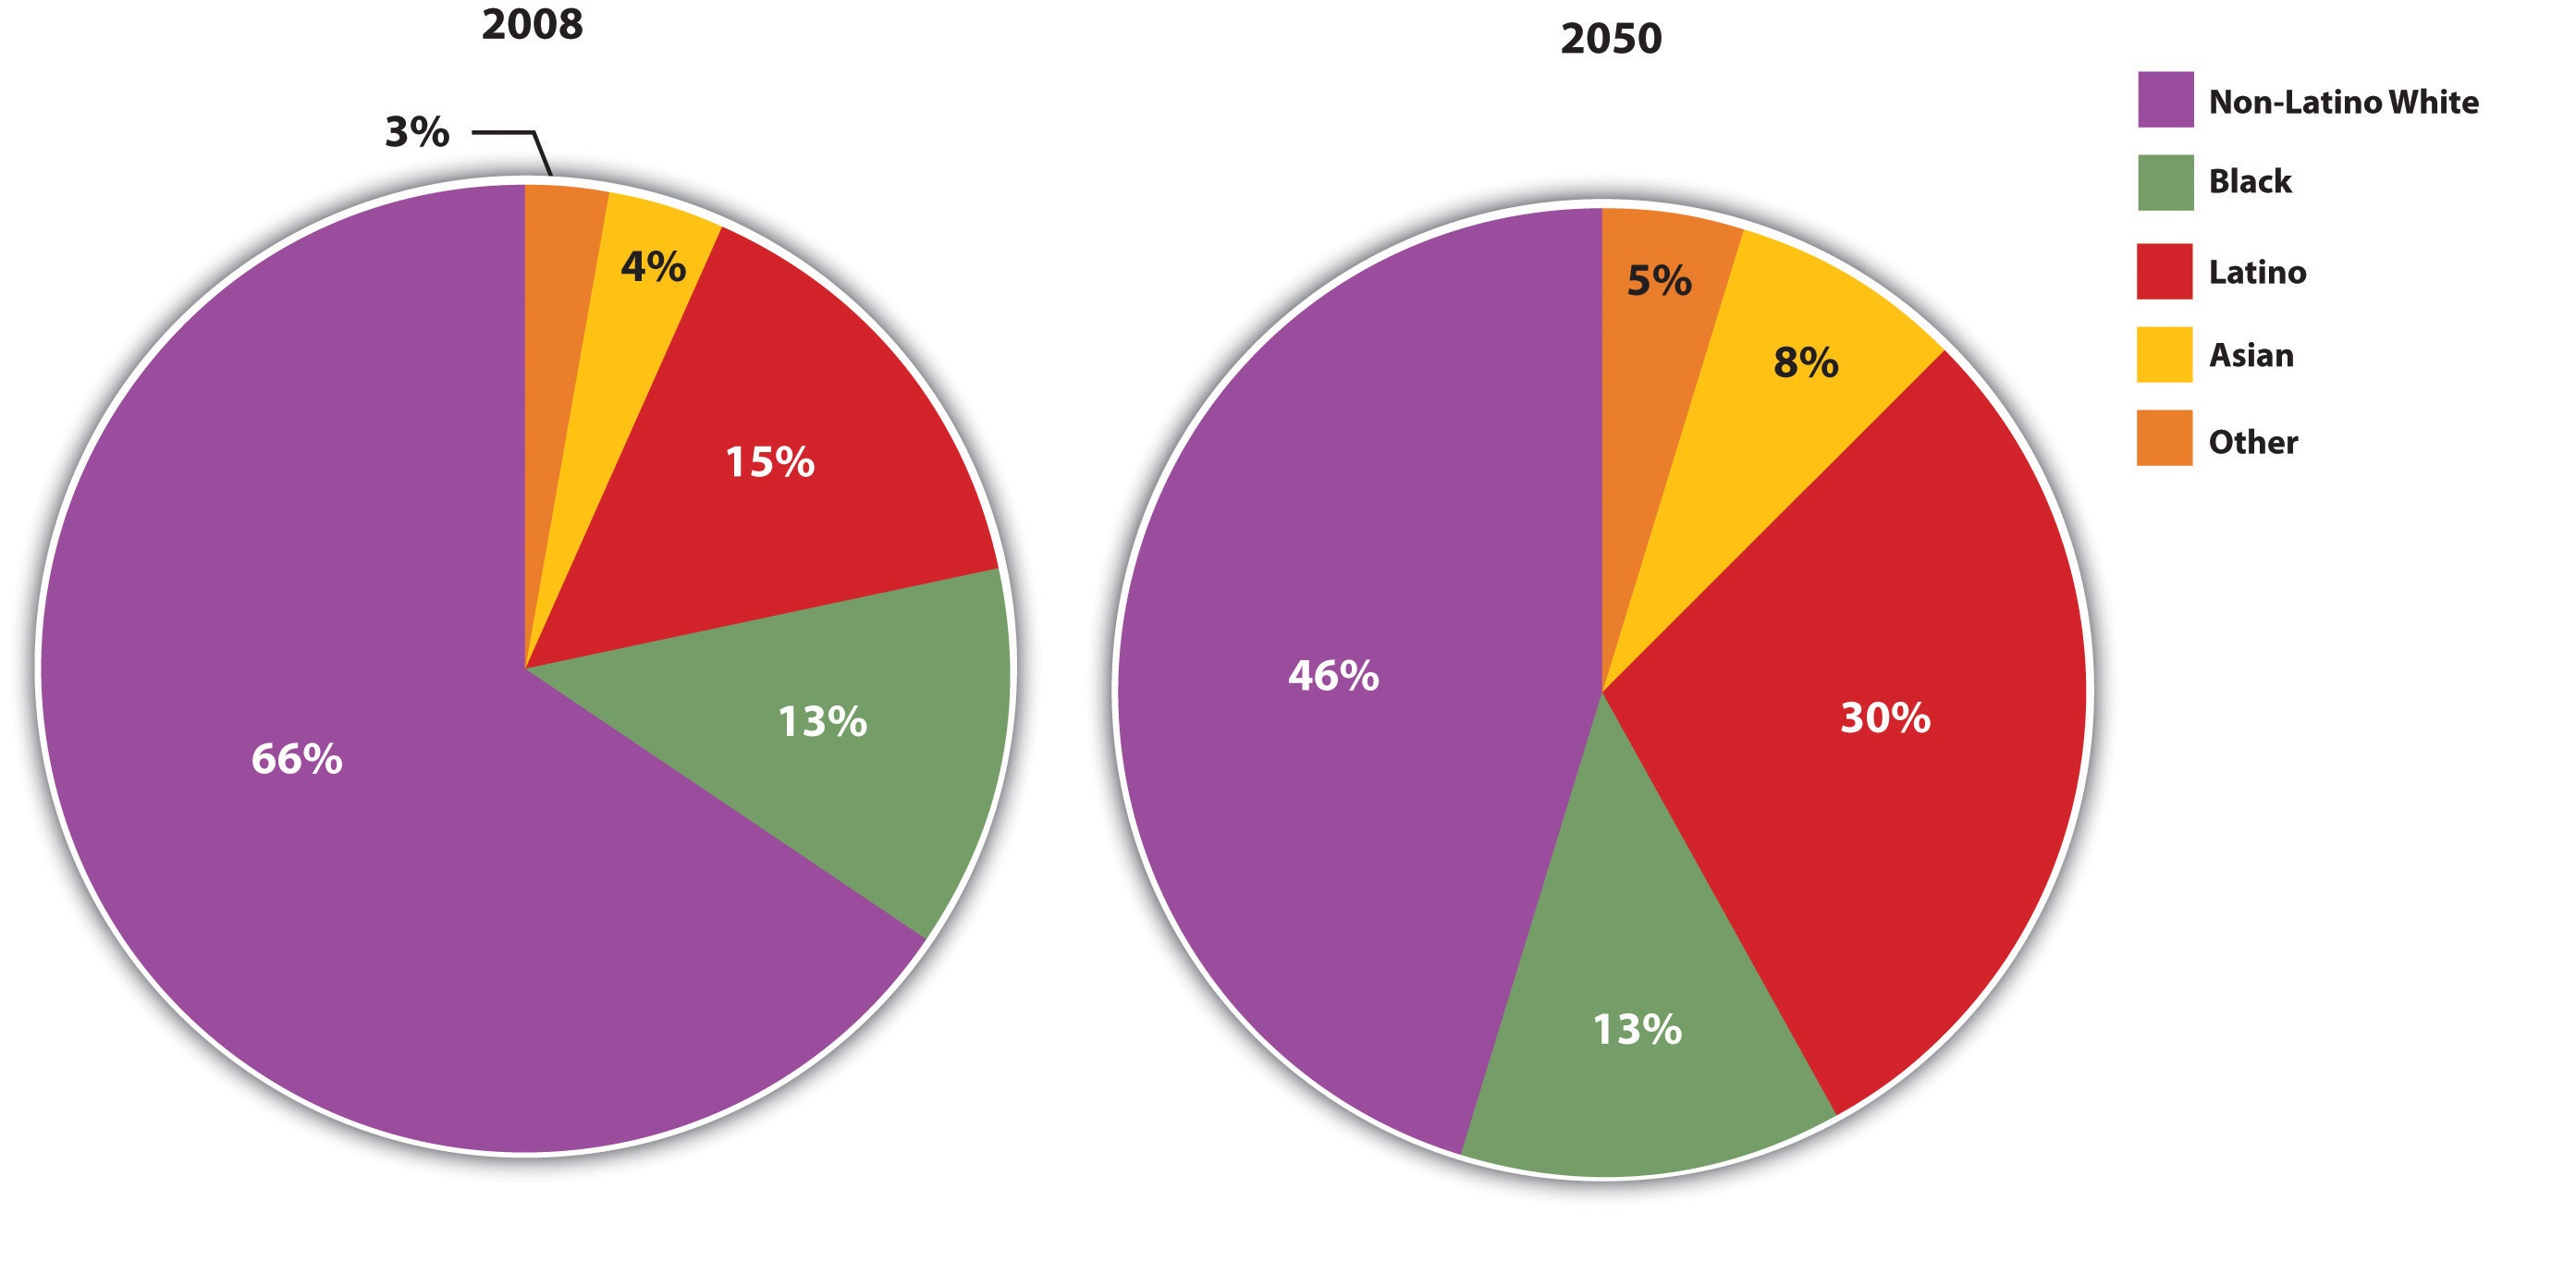 This chart shows the racial and ethnic distribution in the United States in 2008 and the projected distribution for the year 2050. Whereas about two-thirds of the country in 2008 consisted of whites of European backgrounds, in 2050 only about 46% of the country is expected to be non-Latino white, with Latinos making the greatest gains of all the other racial and ethnic groups. On the other side of the coin, people of color now constitute about one-third of the country but their numbers will increase to about 54% of the country in 2050 